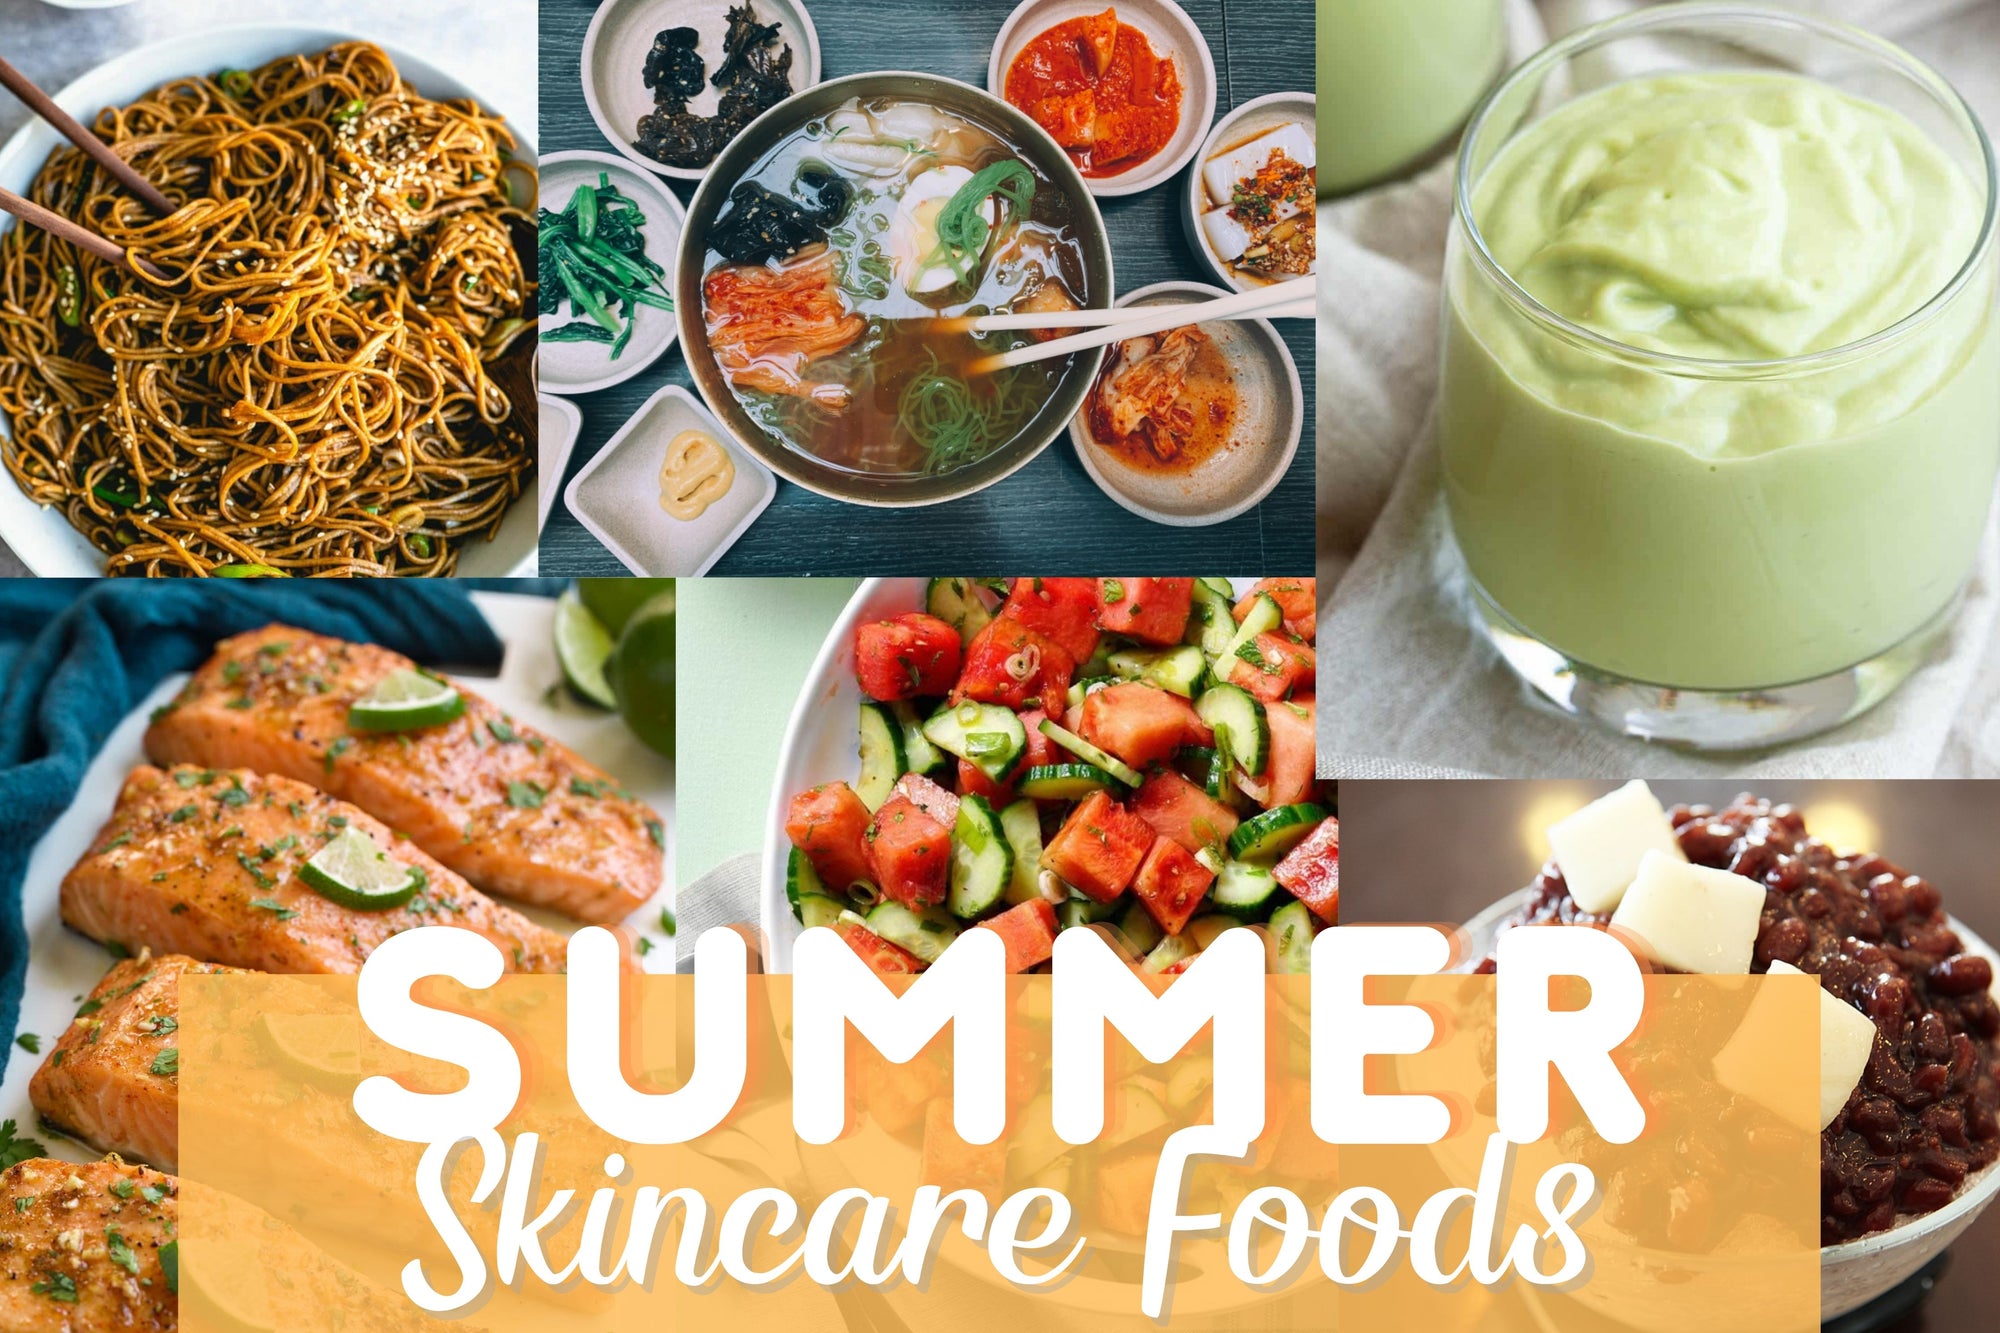 Find the best foods to have clear & healthy skin this summer!